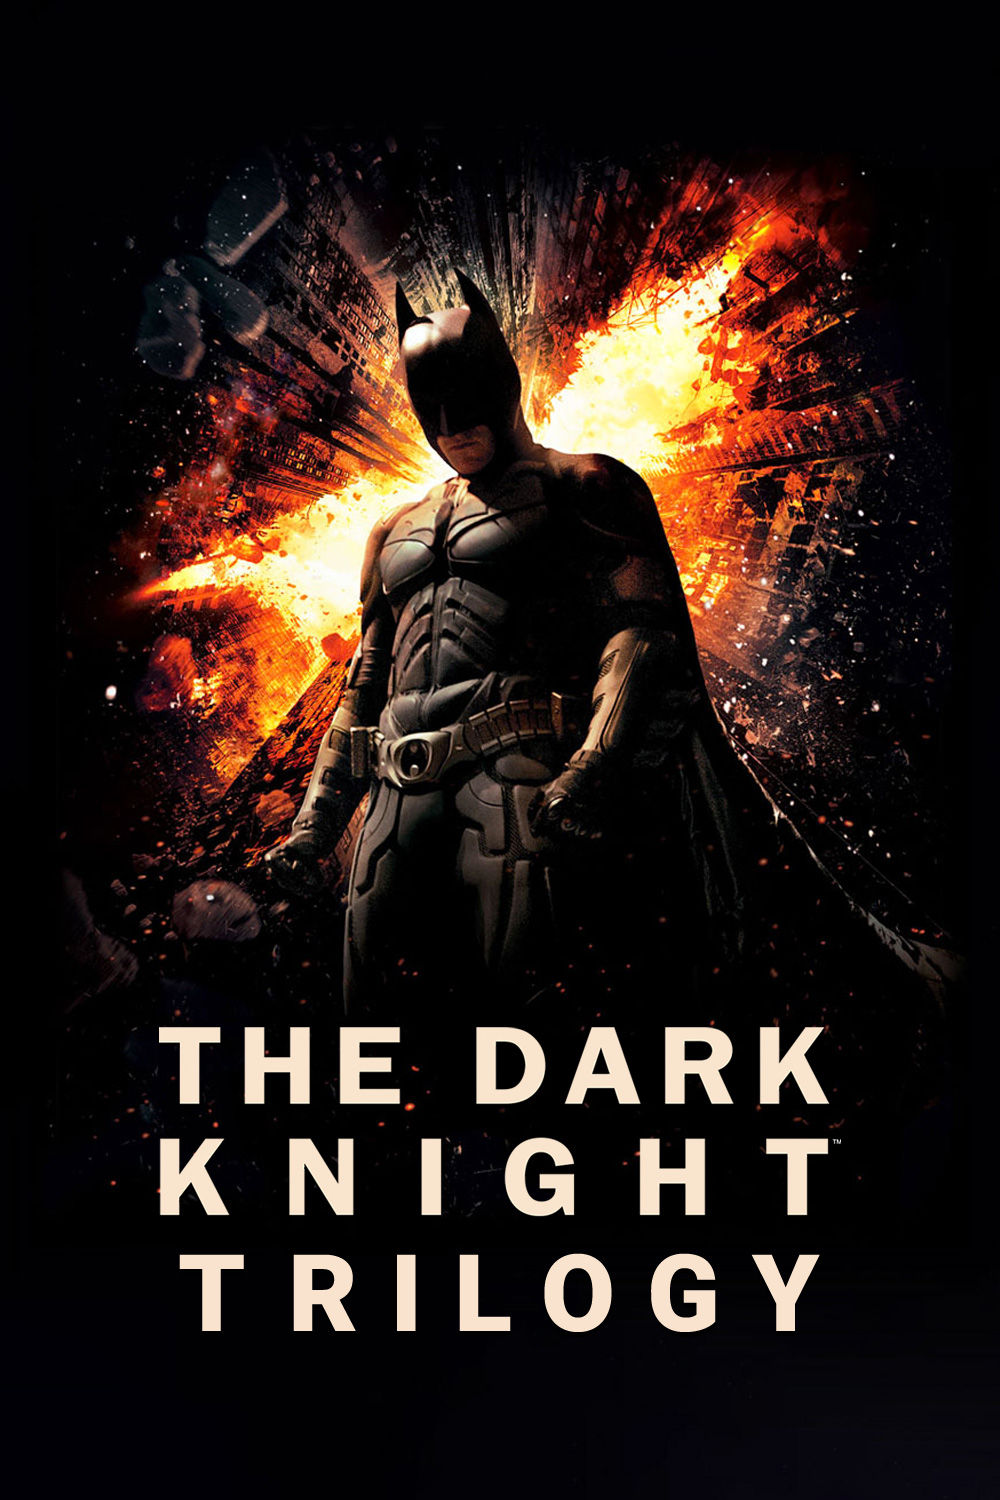 https://assets-in.bmscdn.com/iedb/movies/images/extra/vertical_logo/mobile/thumbnail/xxlarge/the-dark-knight-trilogy-et00309543-12-04-2021-09-48-40.jpg